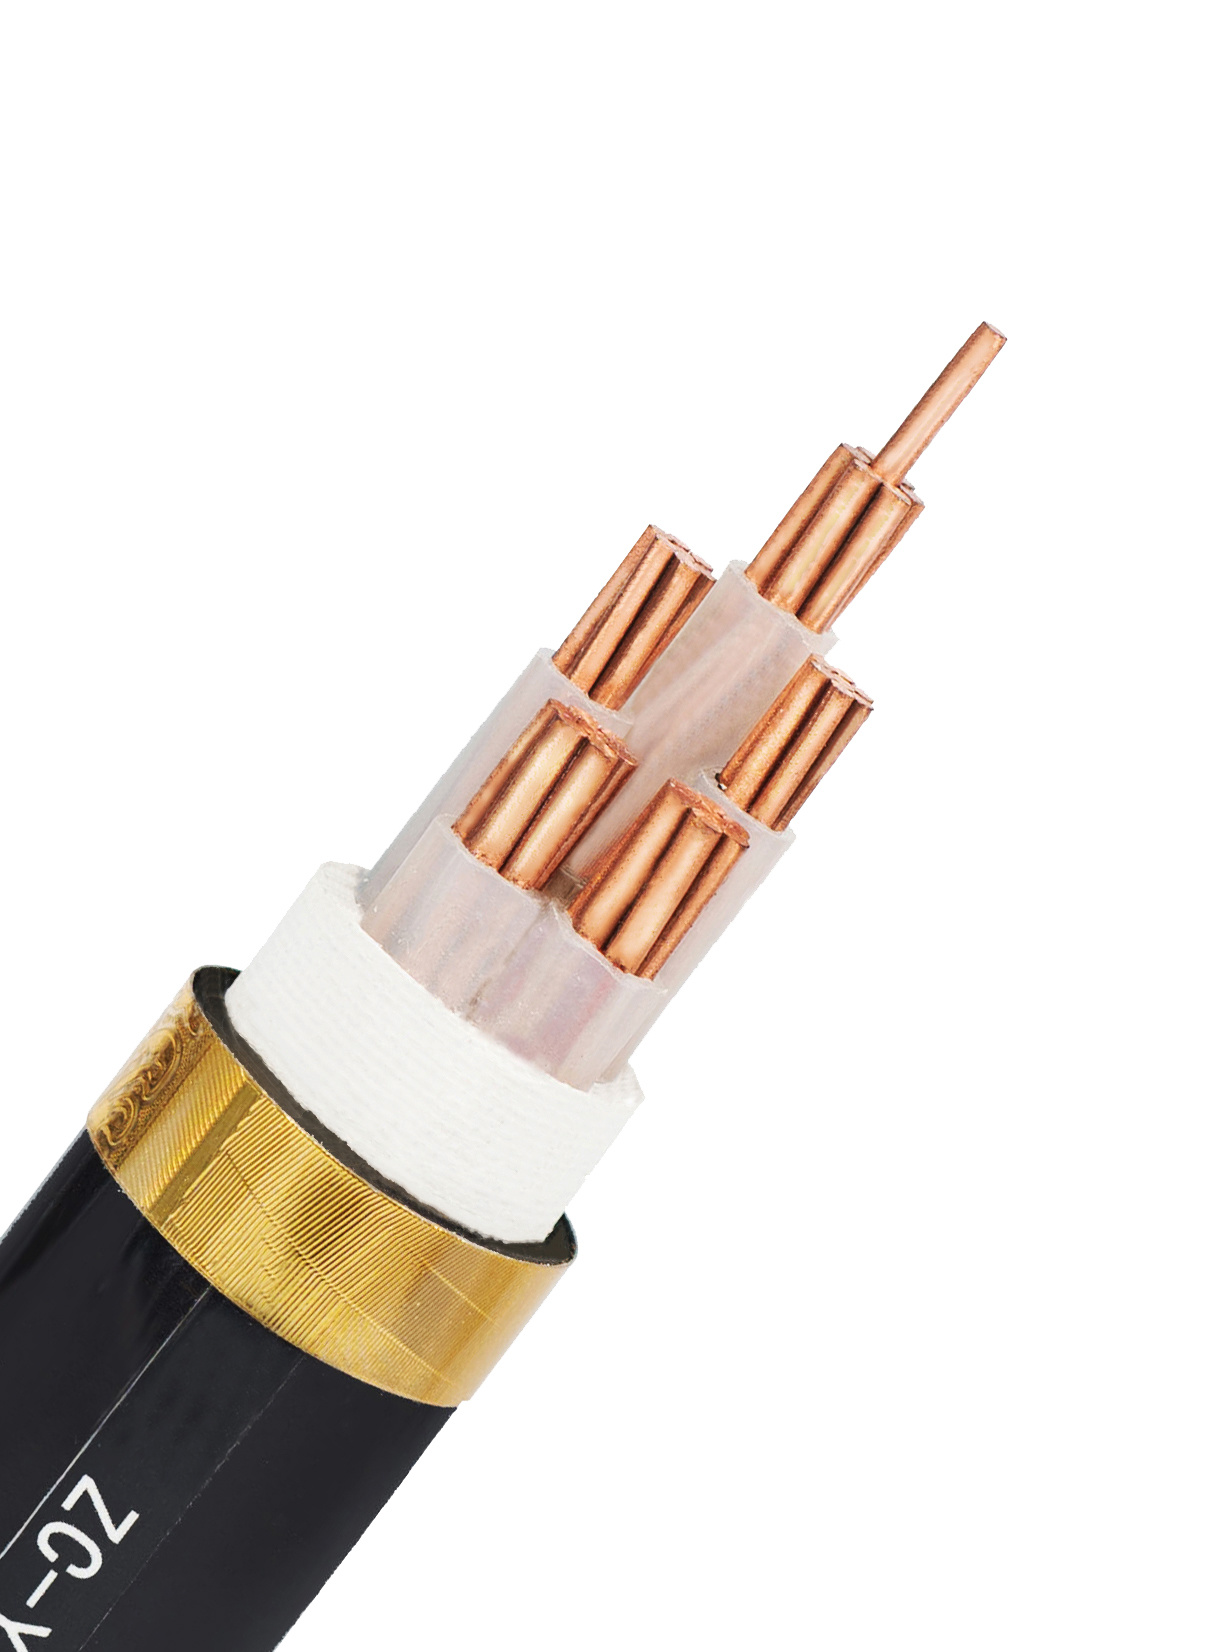 OEM Cable 0.6/1kv Multi Core Copper Conductor XLPE Insulated Armoured PVC Sheathed IEC Standard Electric Power Cable